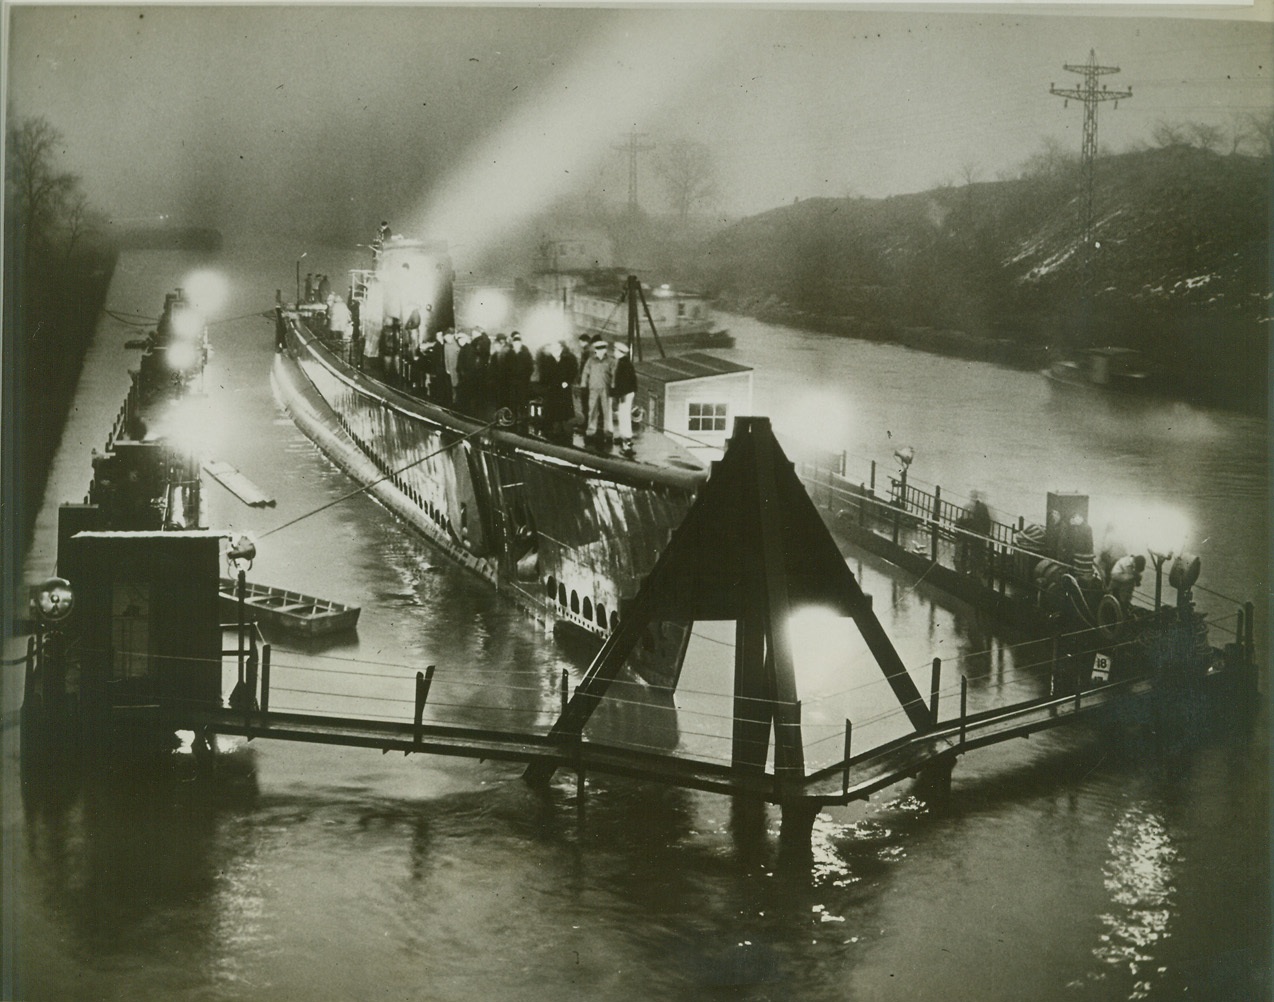 SUB BUILT ON GREAT LAKES NOW ON WAY TO THE SEA, 12/26/1942. CHICAGO; The U.S.S. Peto, the first U.S. Navy submarine ever built on the Great Lakes, is placed in a drydock at Lockport, IL for the trip to New Orleans, LA and the sea, over shallow lower reaches of the Illinois and Mississippi Rivers. The sub is being towed from Chicago through the inland waterways after tests and trial run from Manitowoc, Wis. Shipyards, where it was built. Credit: OWI Radiophoto from ACME;